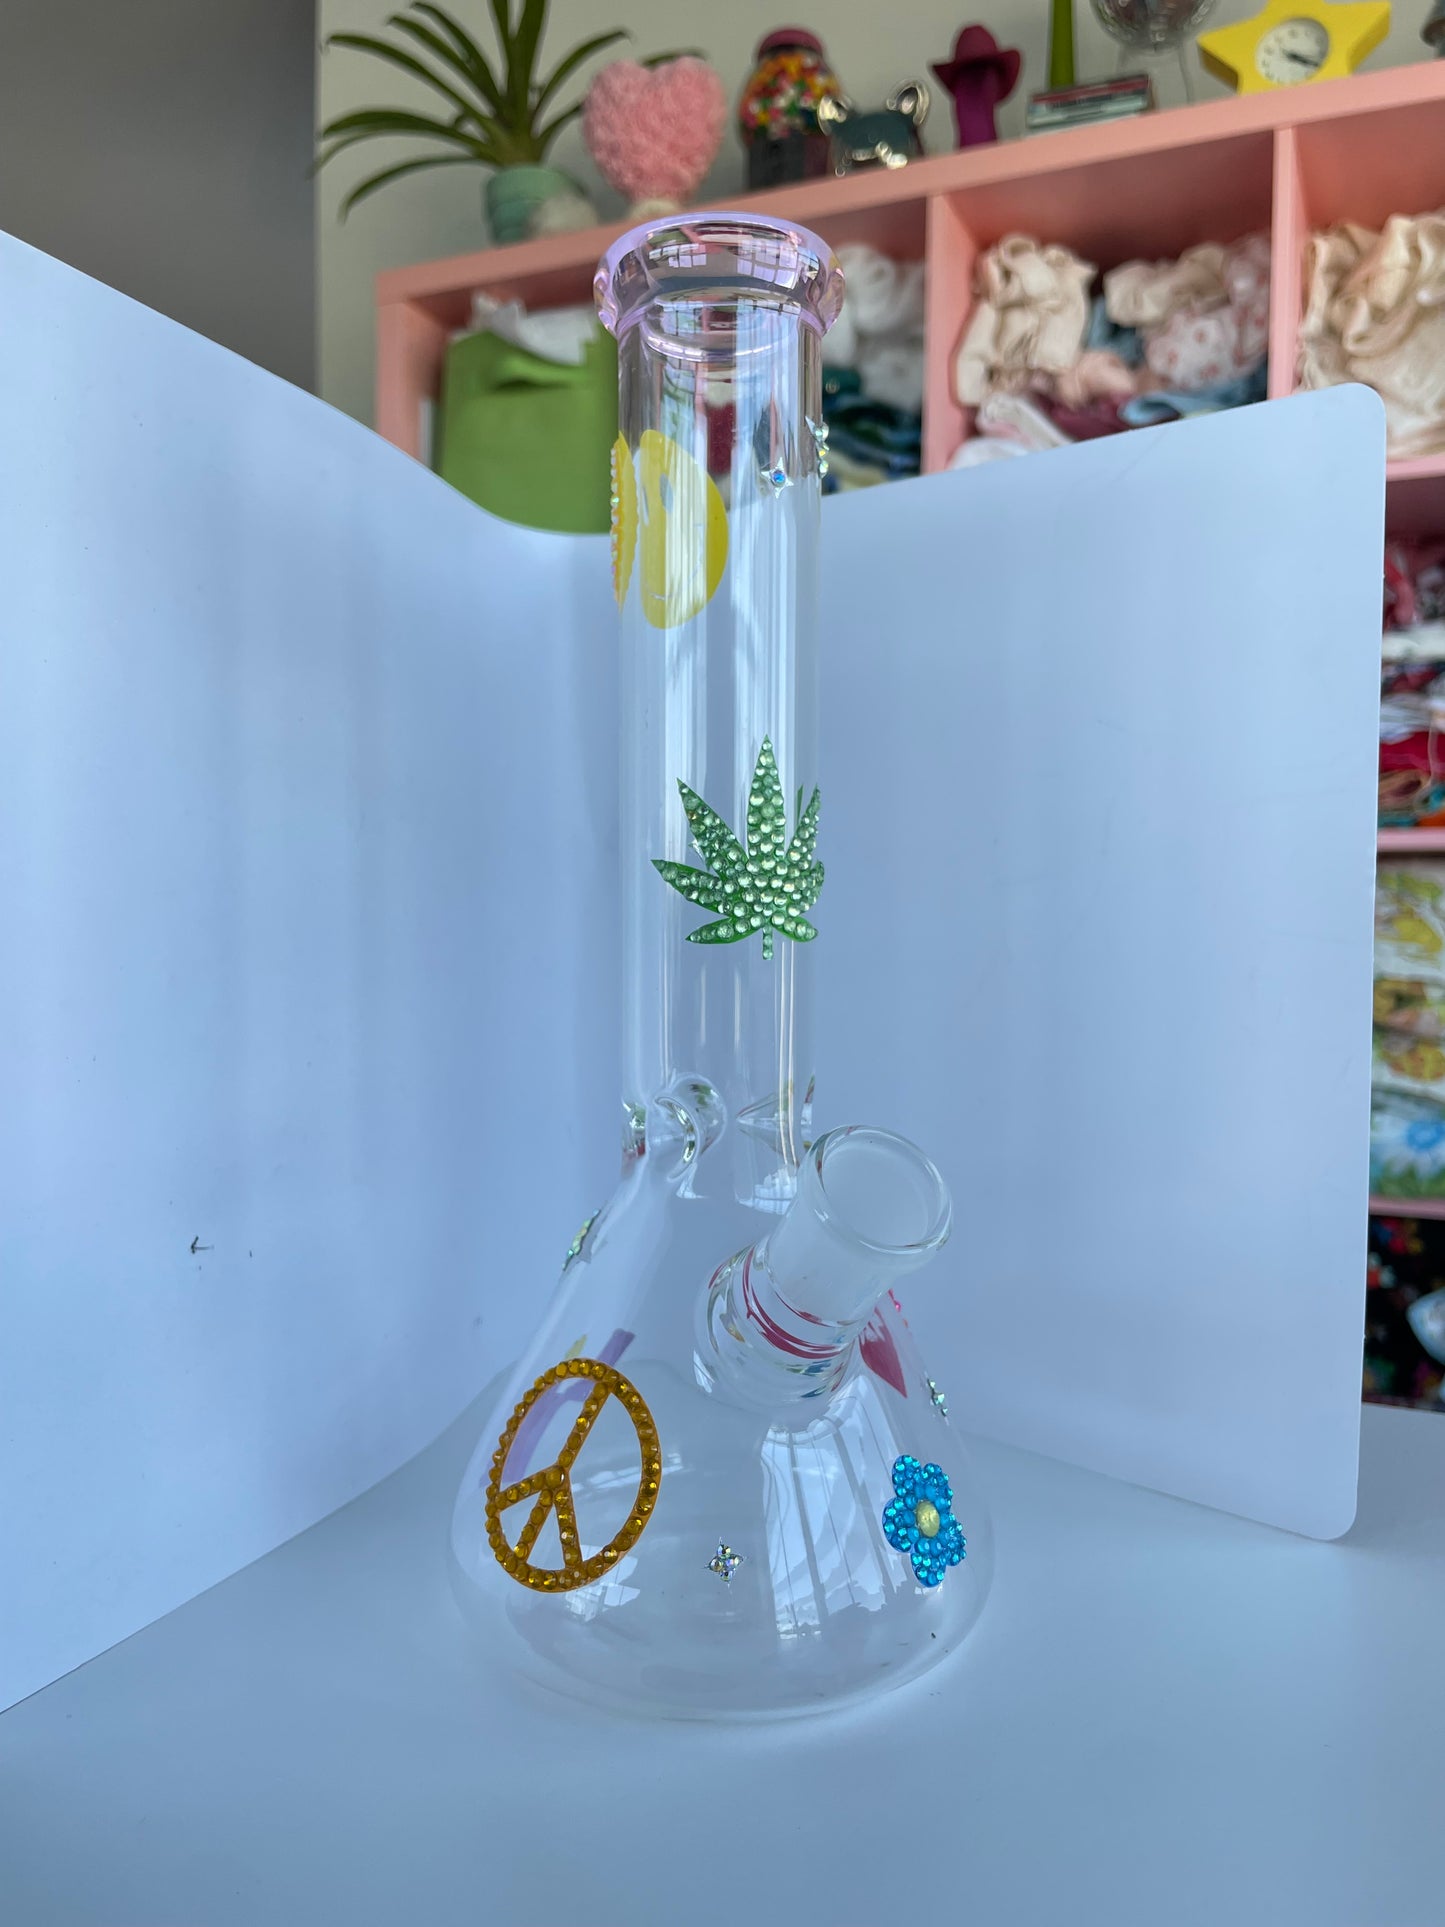 10" bedazzled girly decal bong